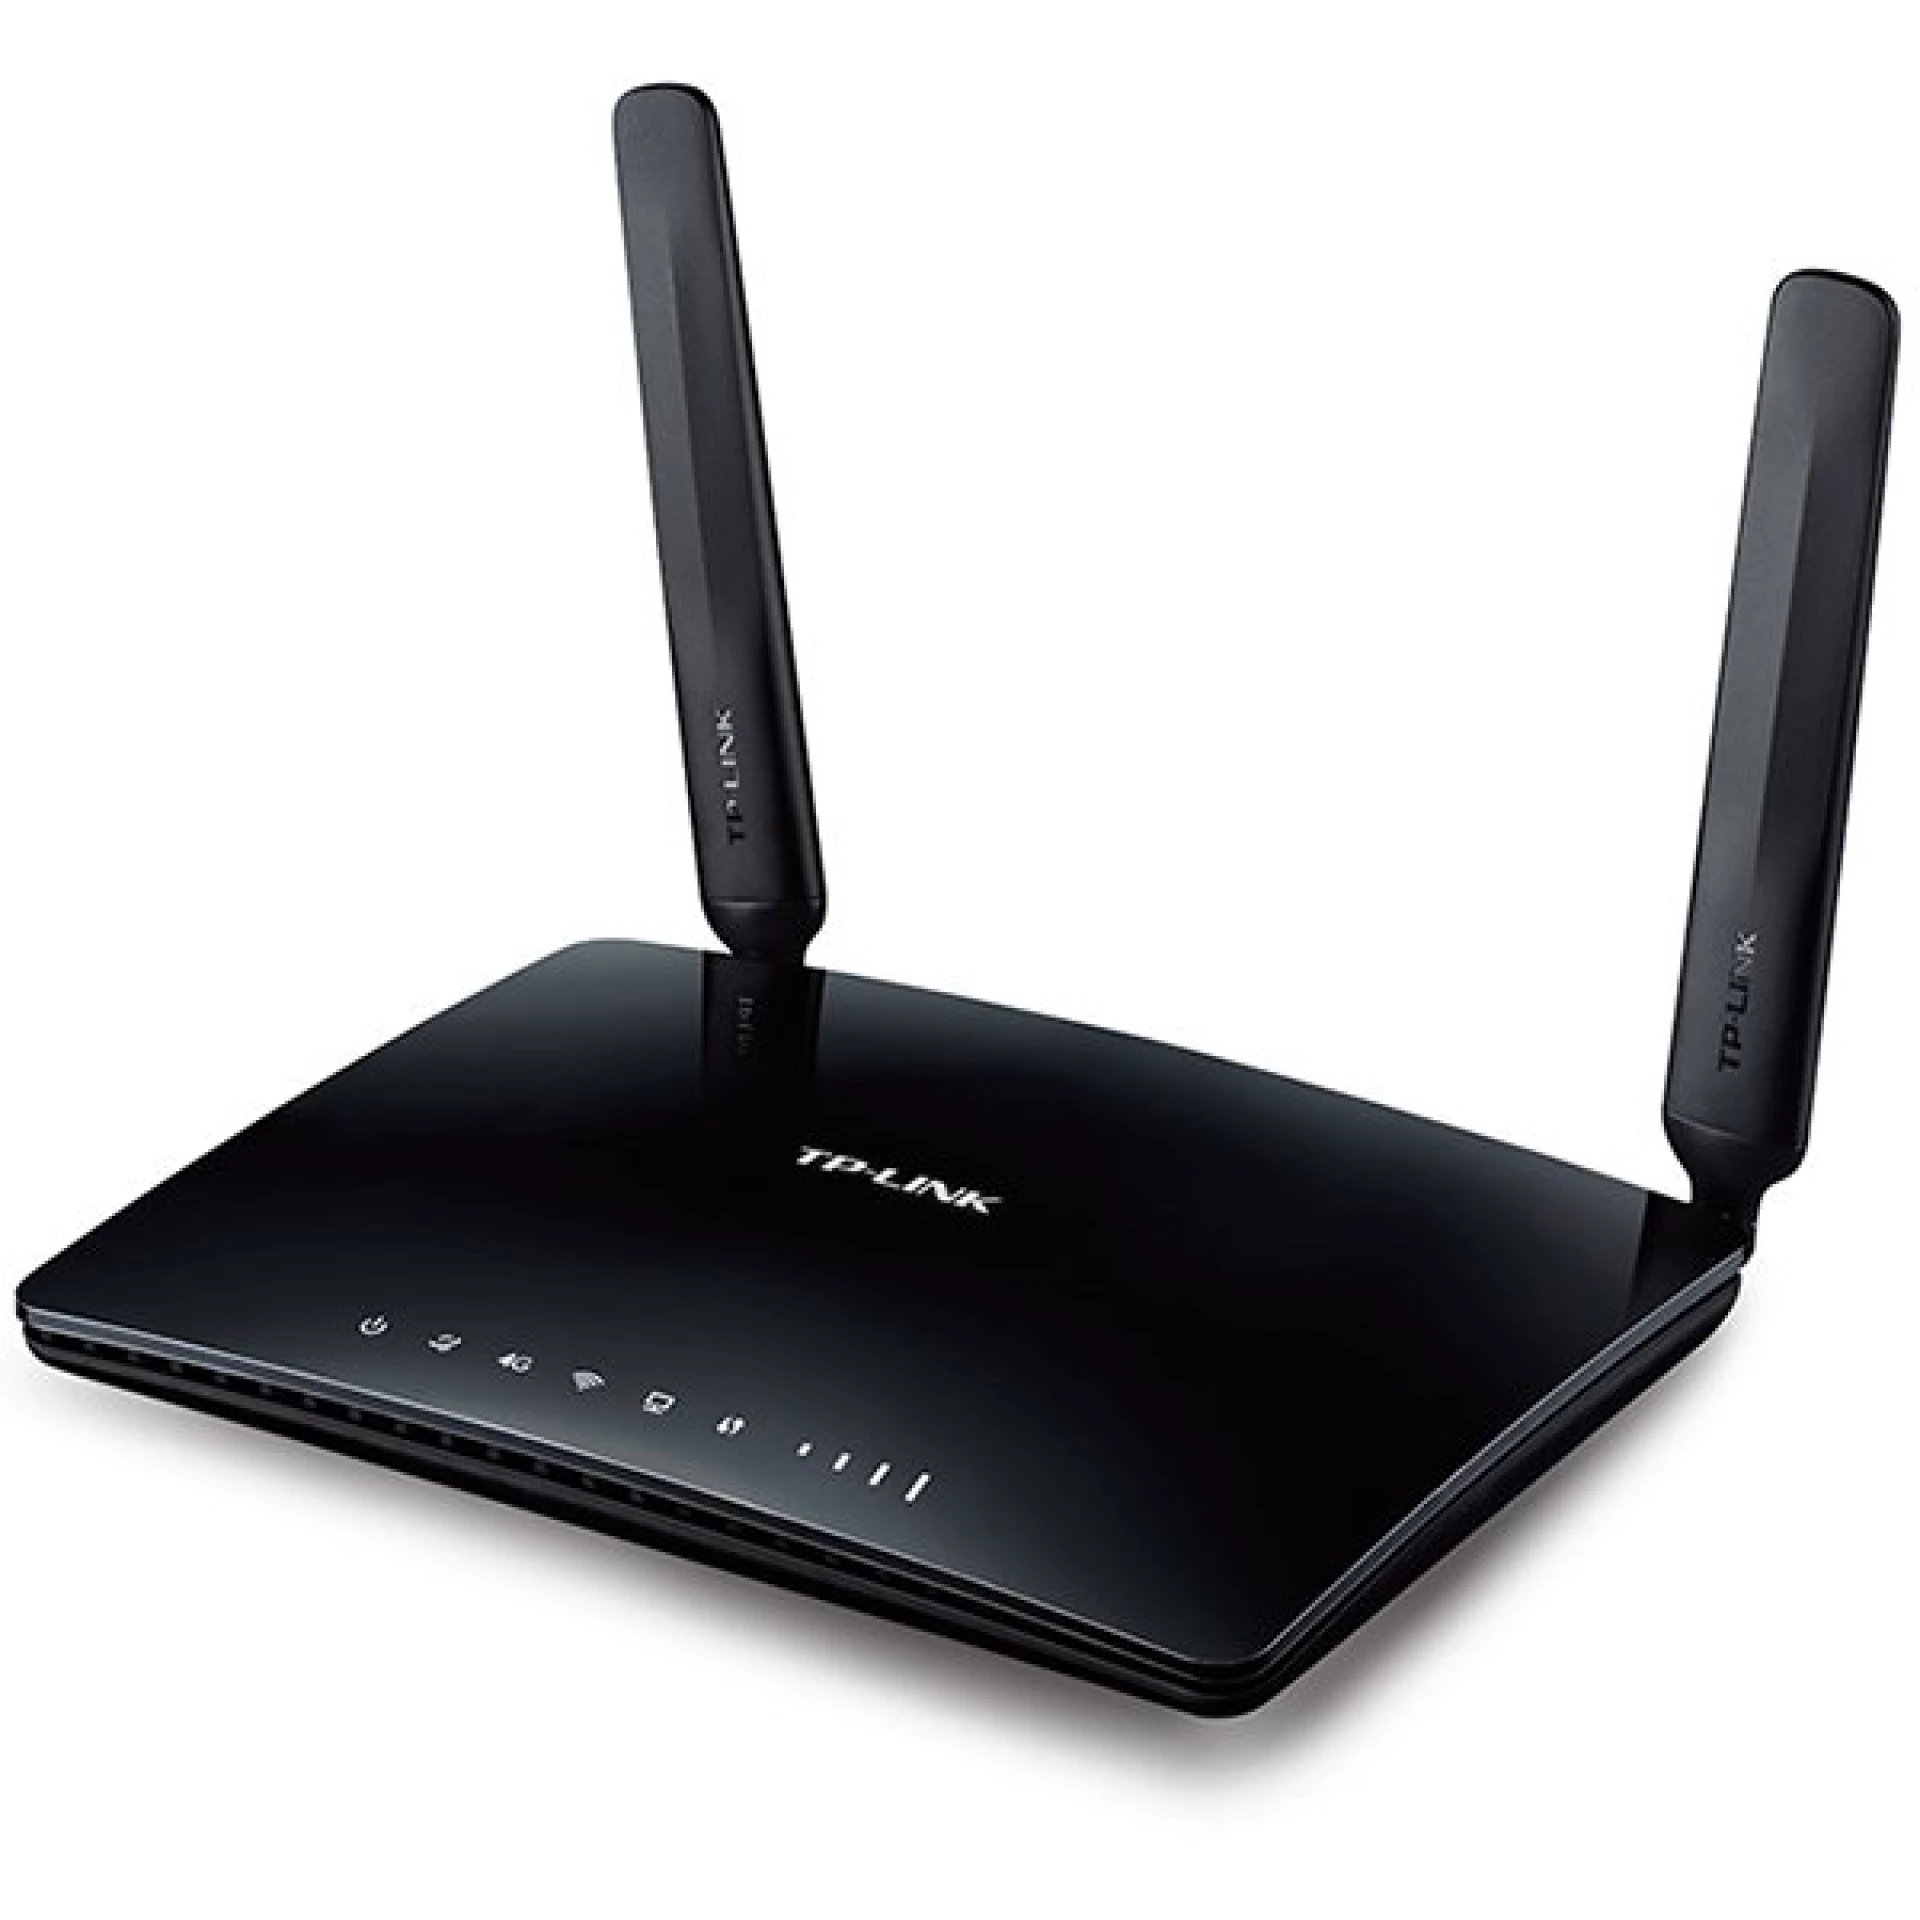 TP-Link AC750 Wireless Dual Band 4G LTE Router w 4G LTE modem, LTE-FDD/LTE-TDD/DC-HSPA+/HSPA+/HSPA/UMTS/EDGE/GPRS/GSM,3x10/100Mbps LAN,1x10/100Mbps LAN/WAN,300Mbps at 2.4GHz,433Mbps at 5GHz,802.11b/g/n/ac,3 int. Wi-Fi + 2 LTE antennas, Tether App